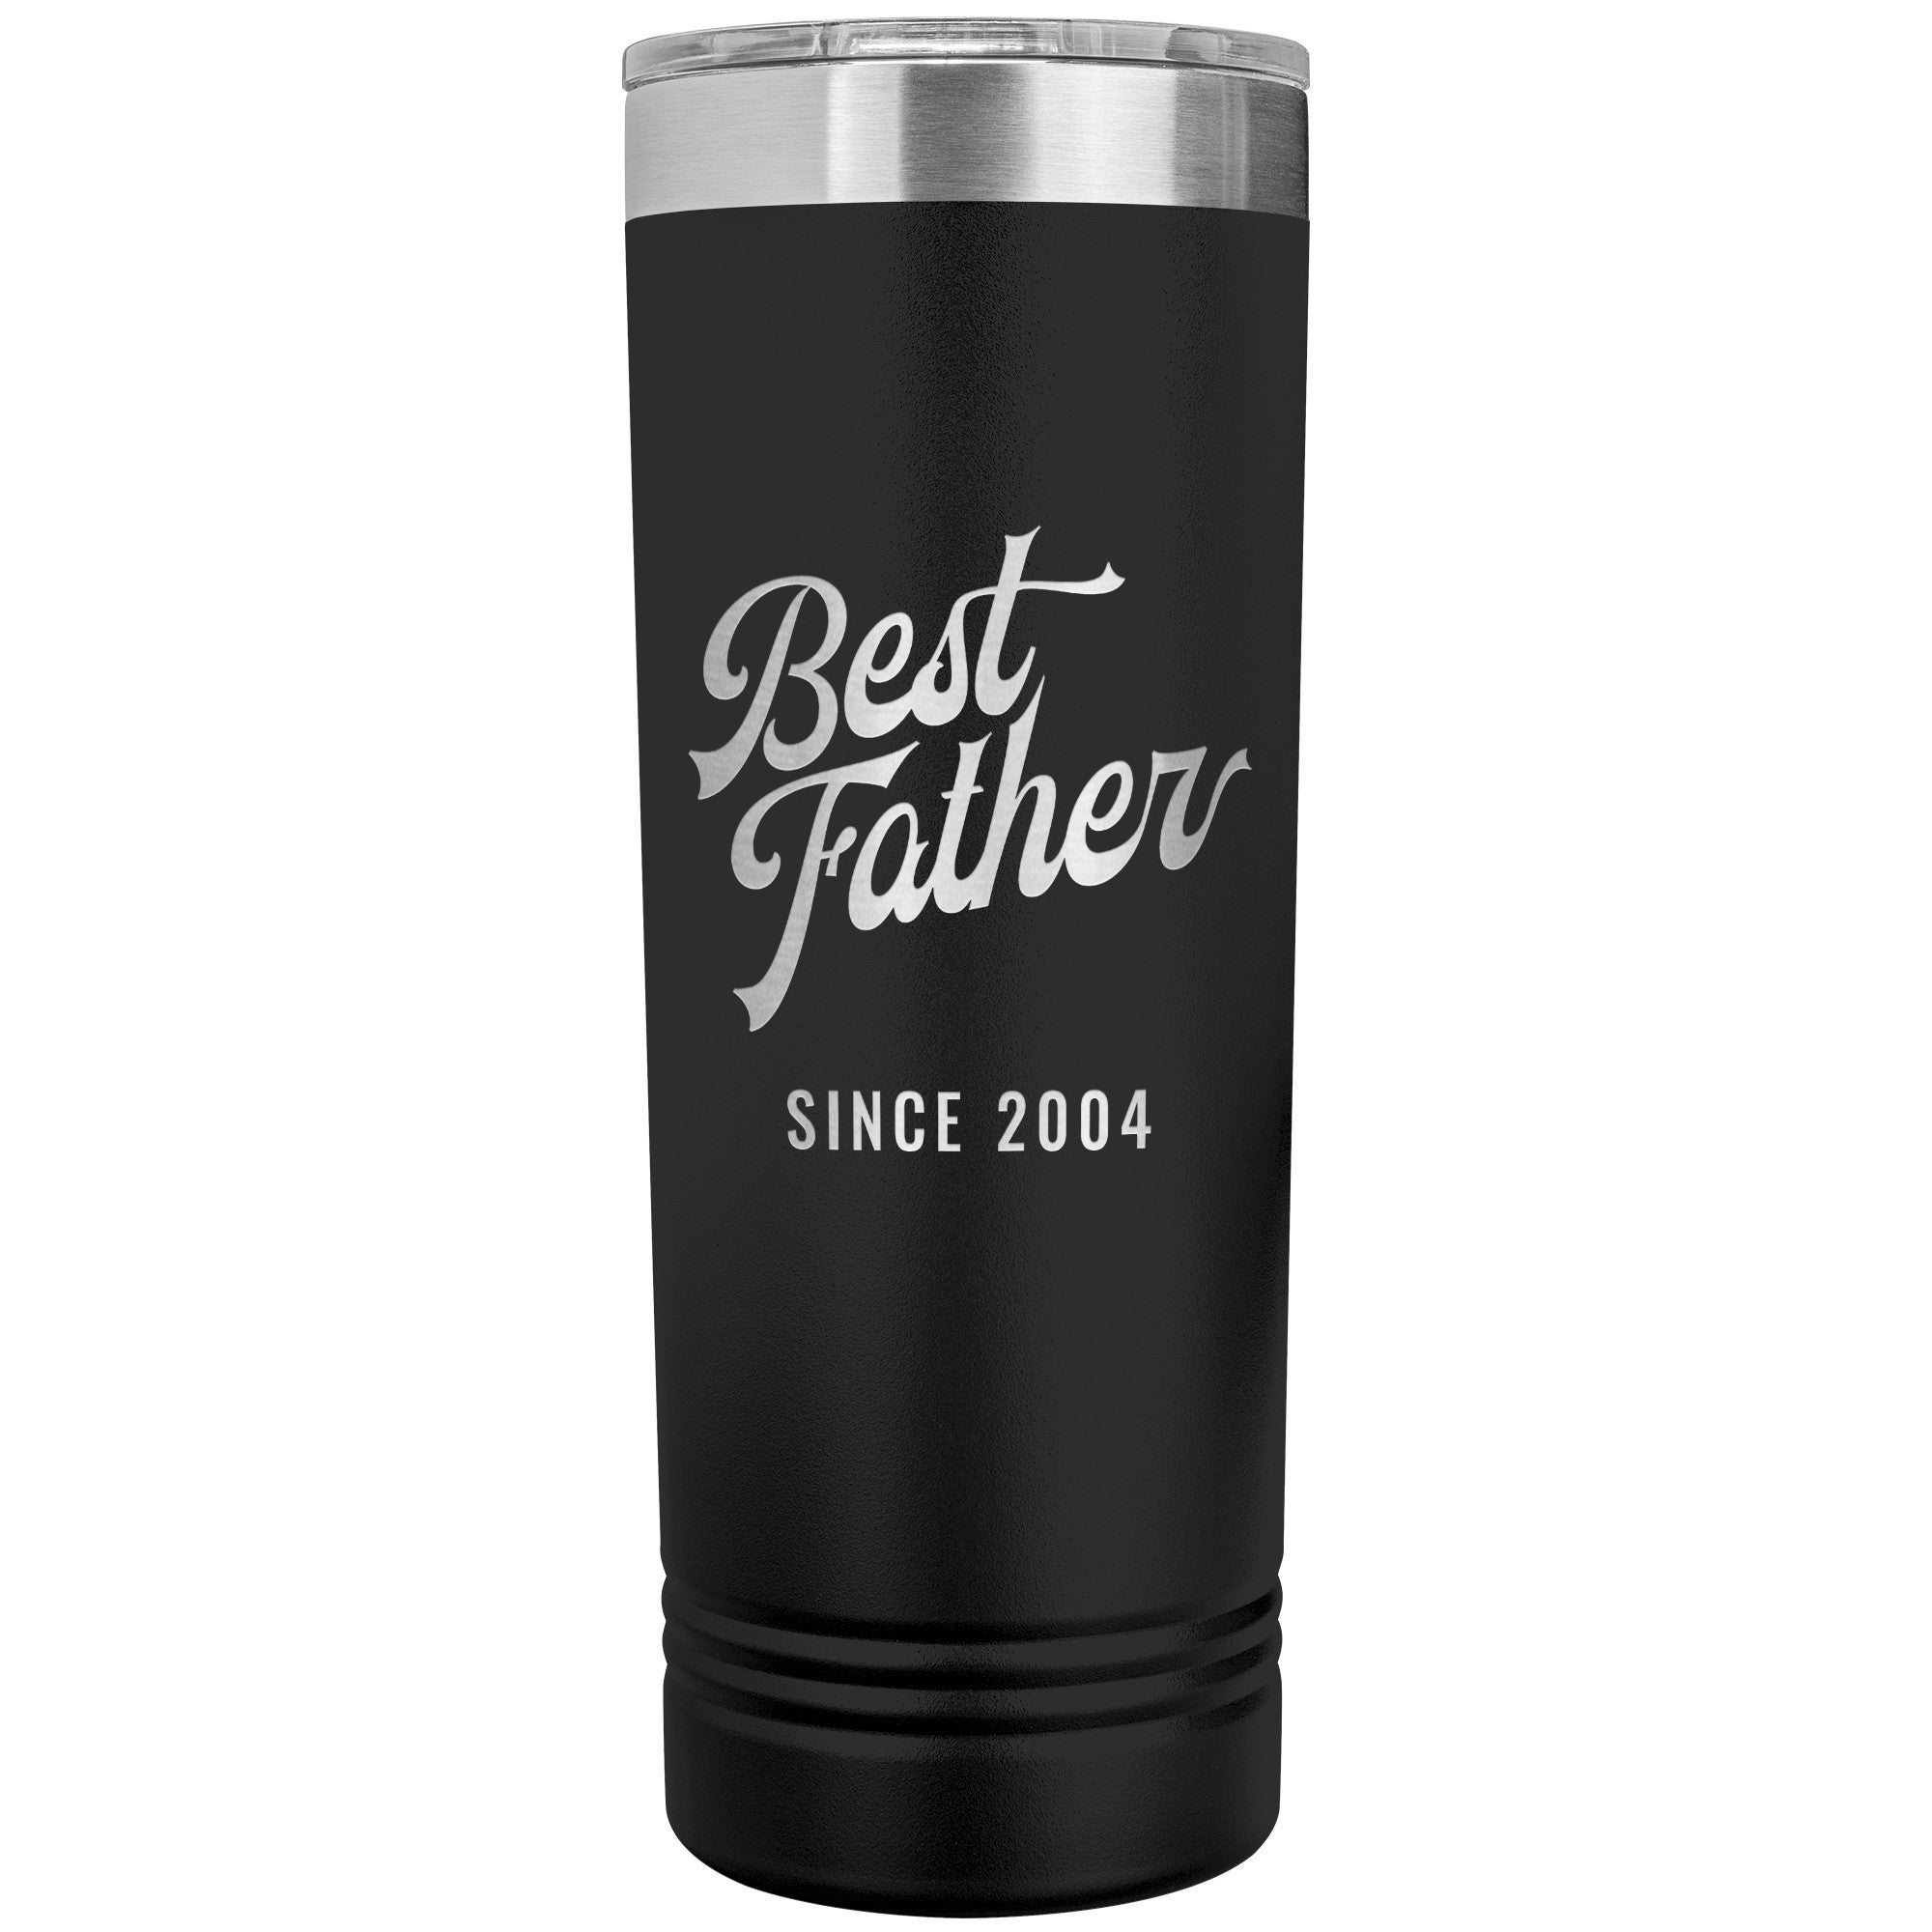 Best Father Since 2004 - 22oz Insulated Skinny Tumbler